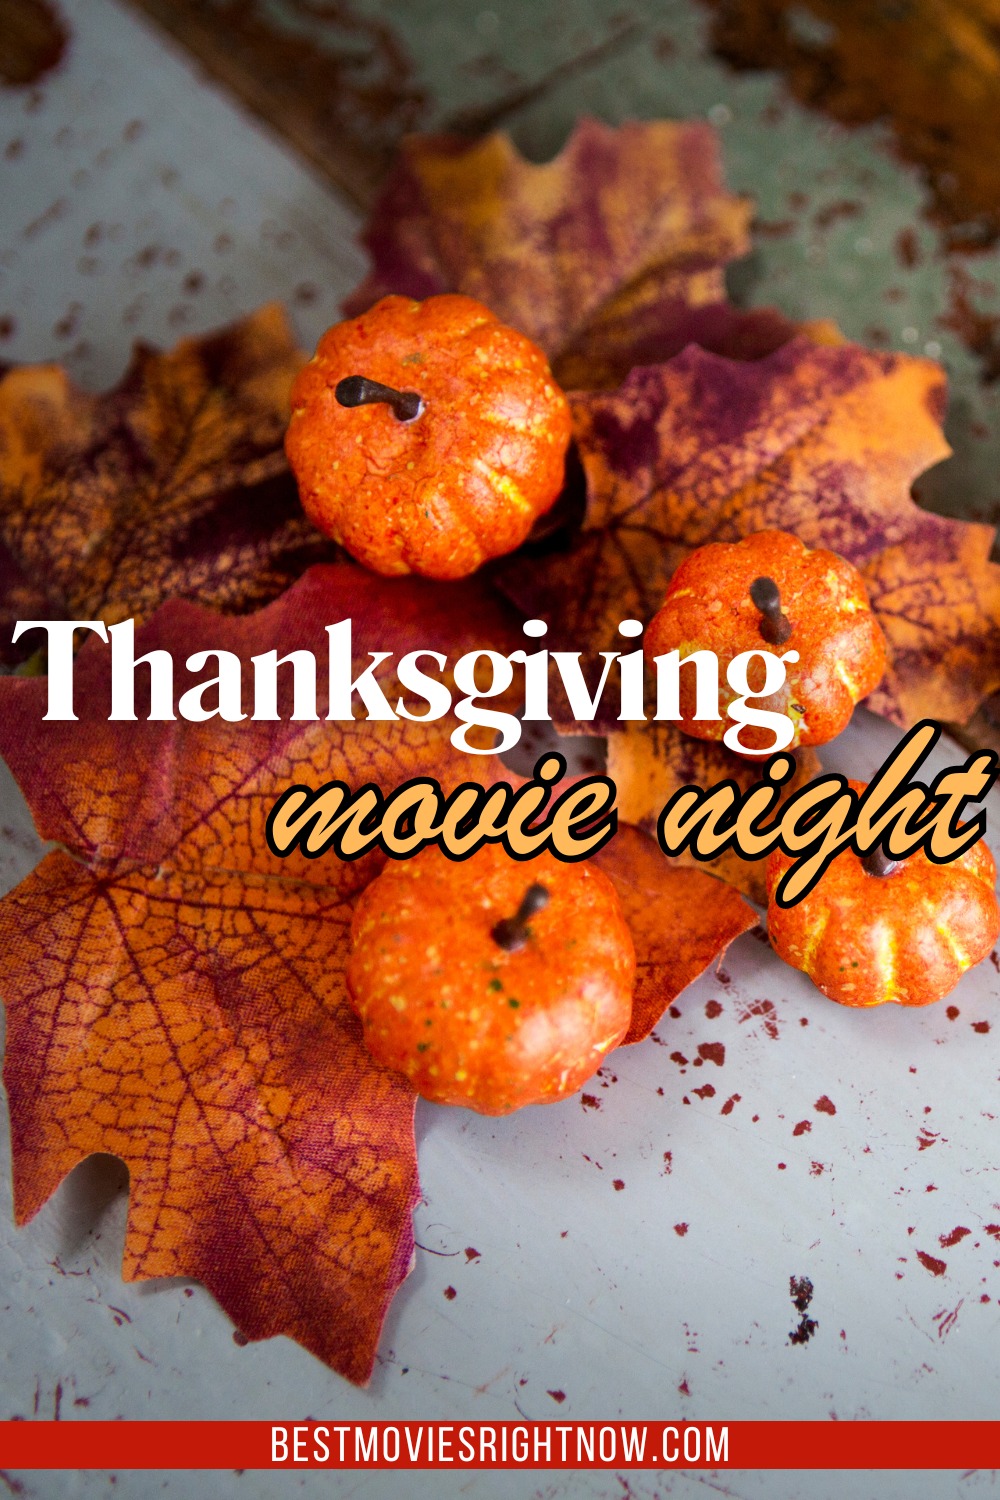  Thanksgiving theme background with text: 